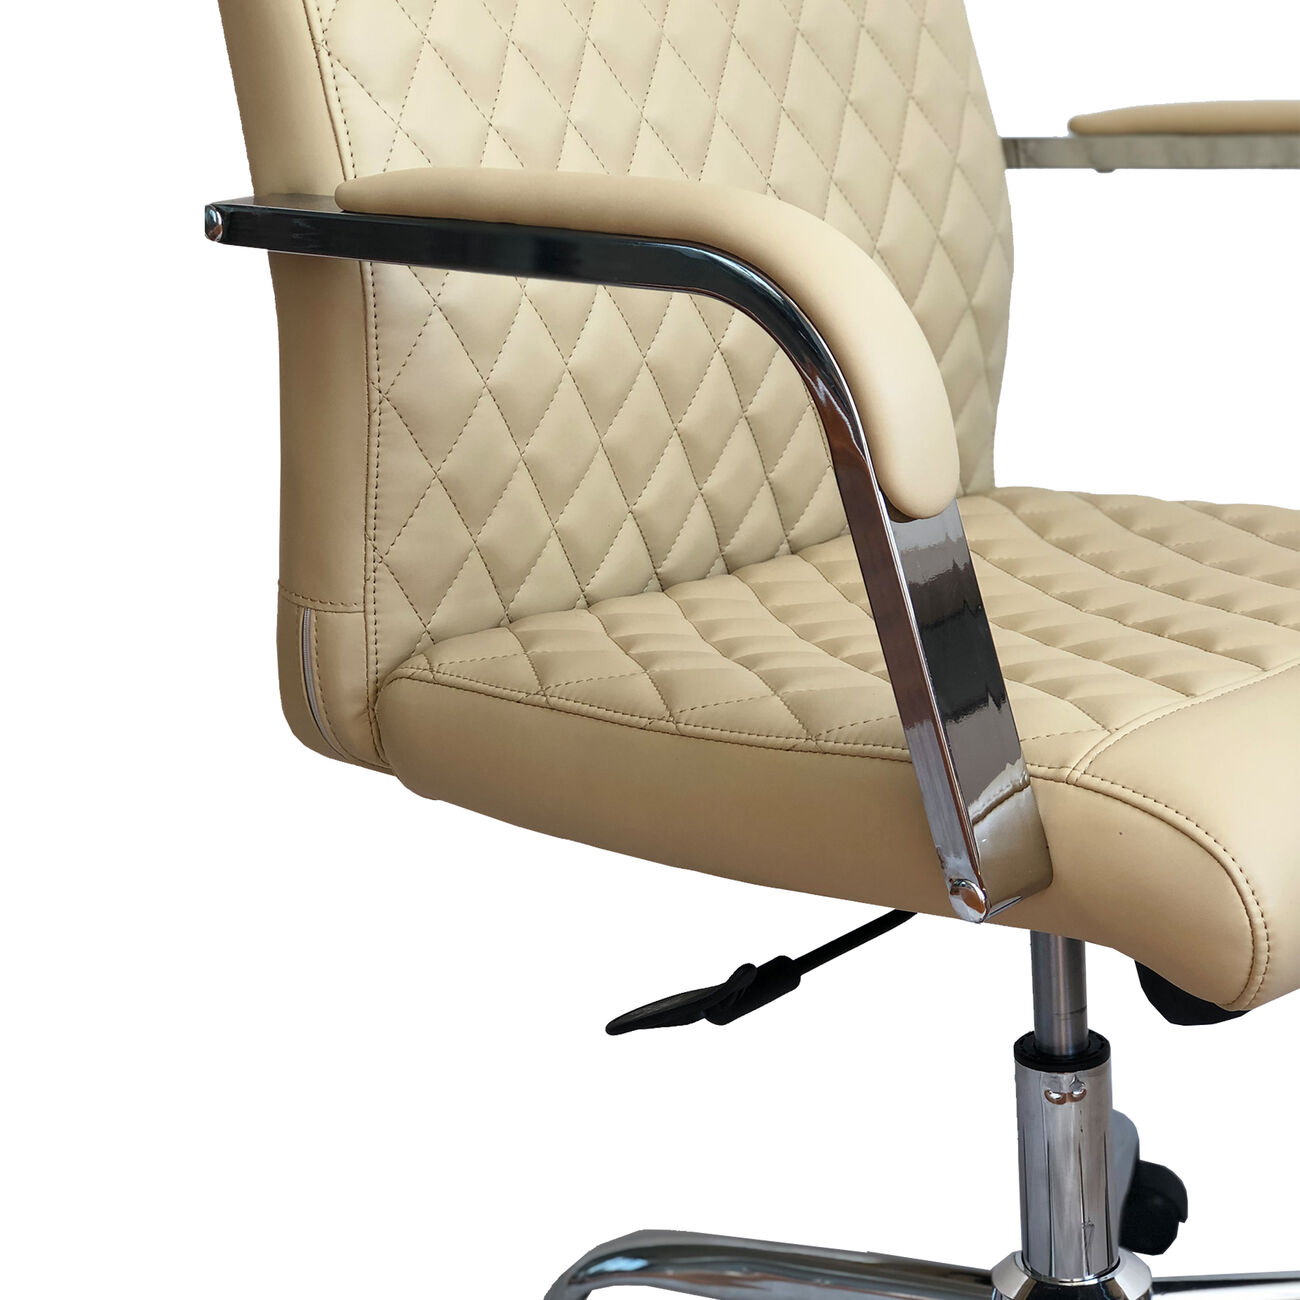 Adjustable Diamond Stitched Ergonomic Leatherette Office Chair with Casters, Beige and Chrome